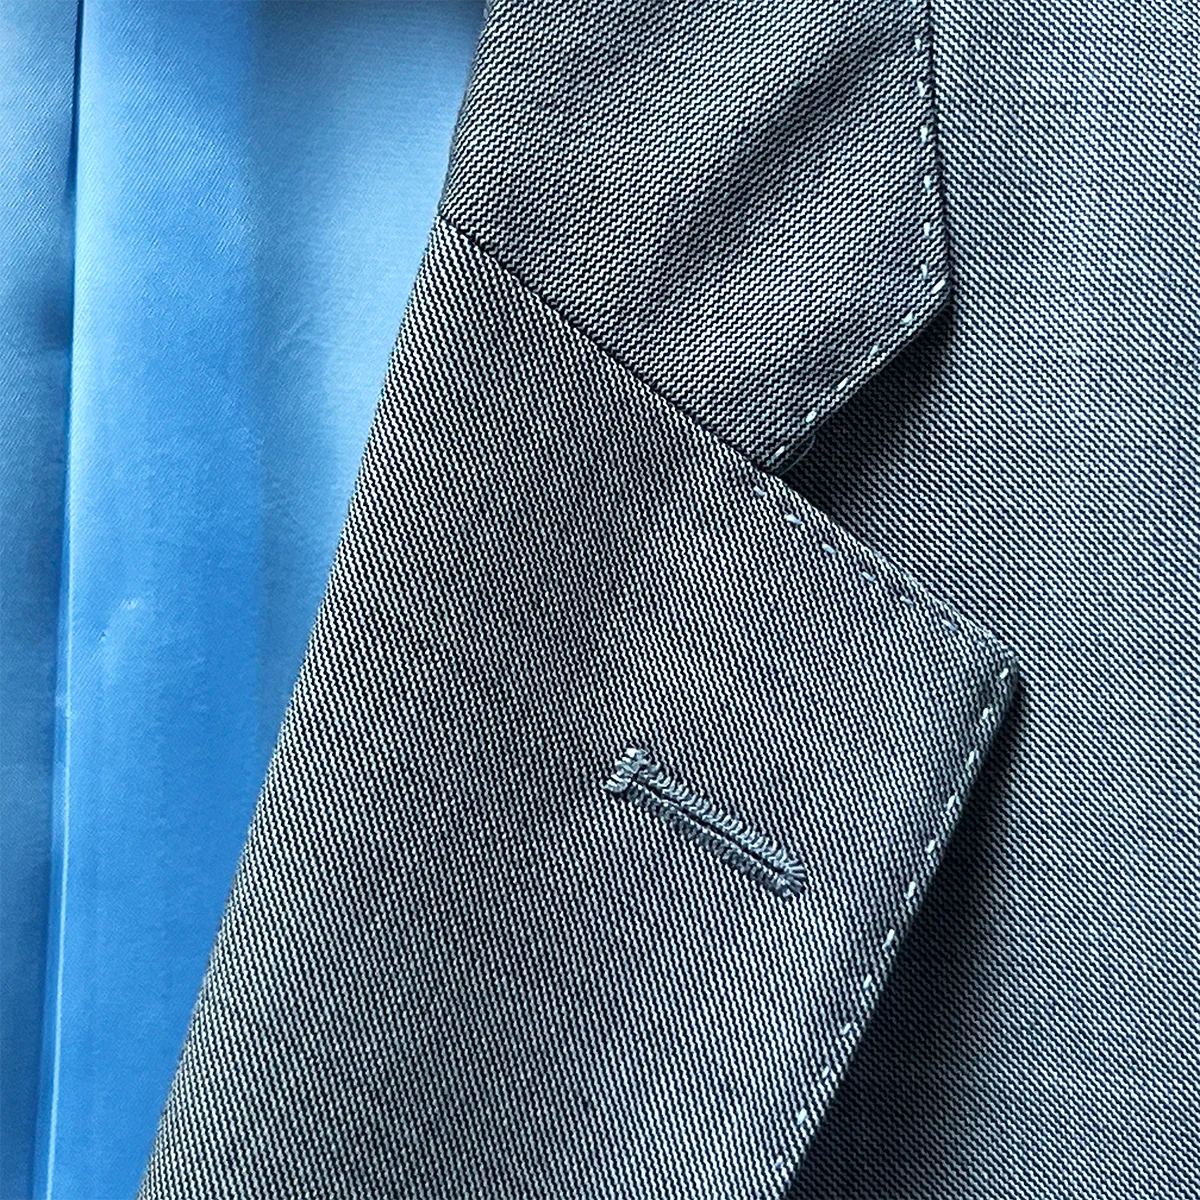 Notch lapel detail on the light grey sharkskin suit with sky blue accent buttonhole stitching.